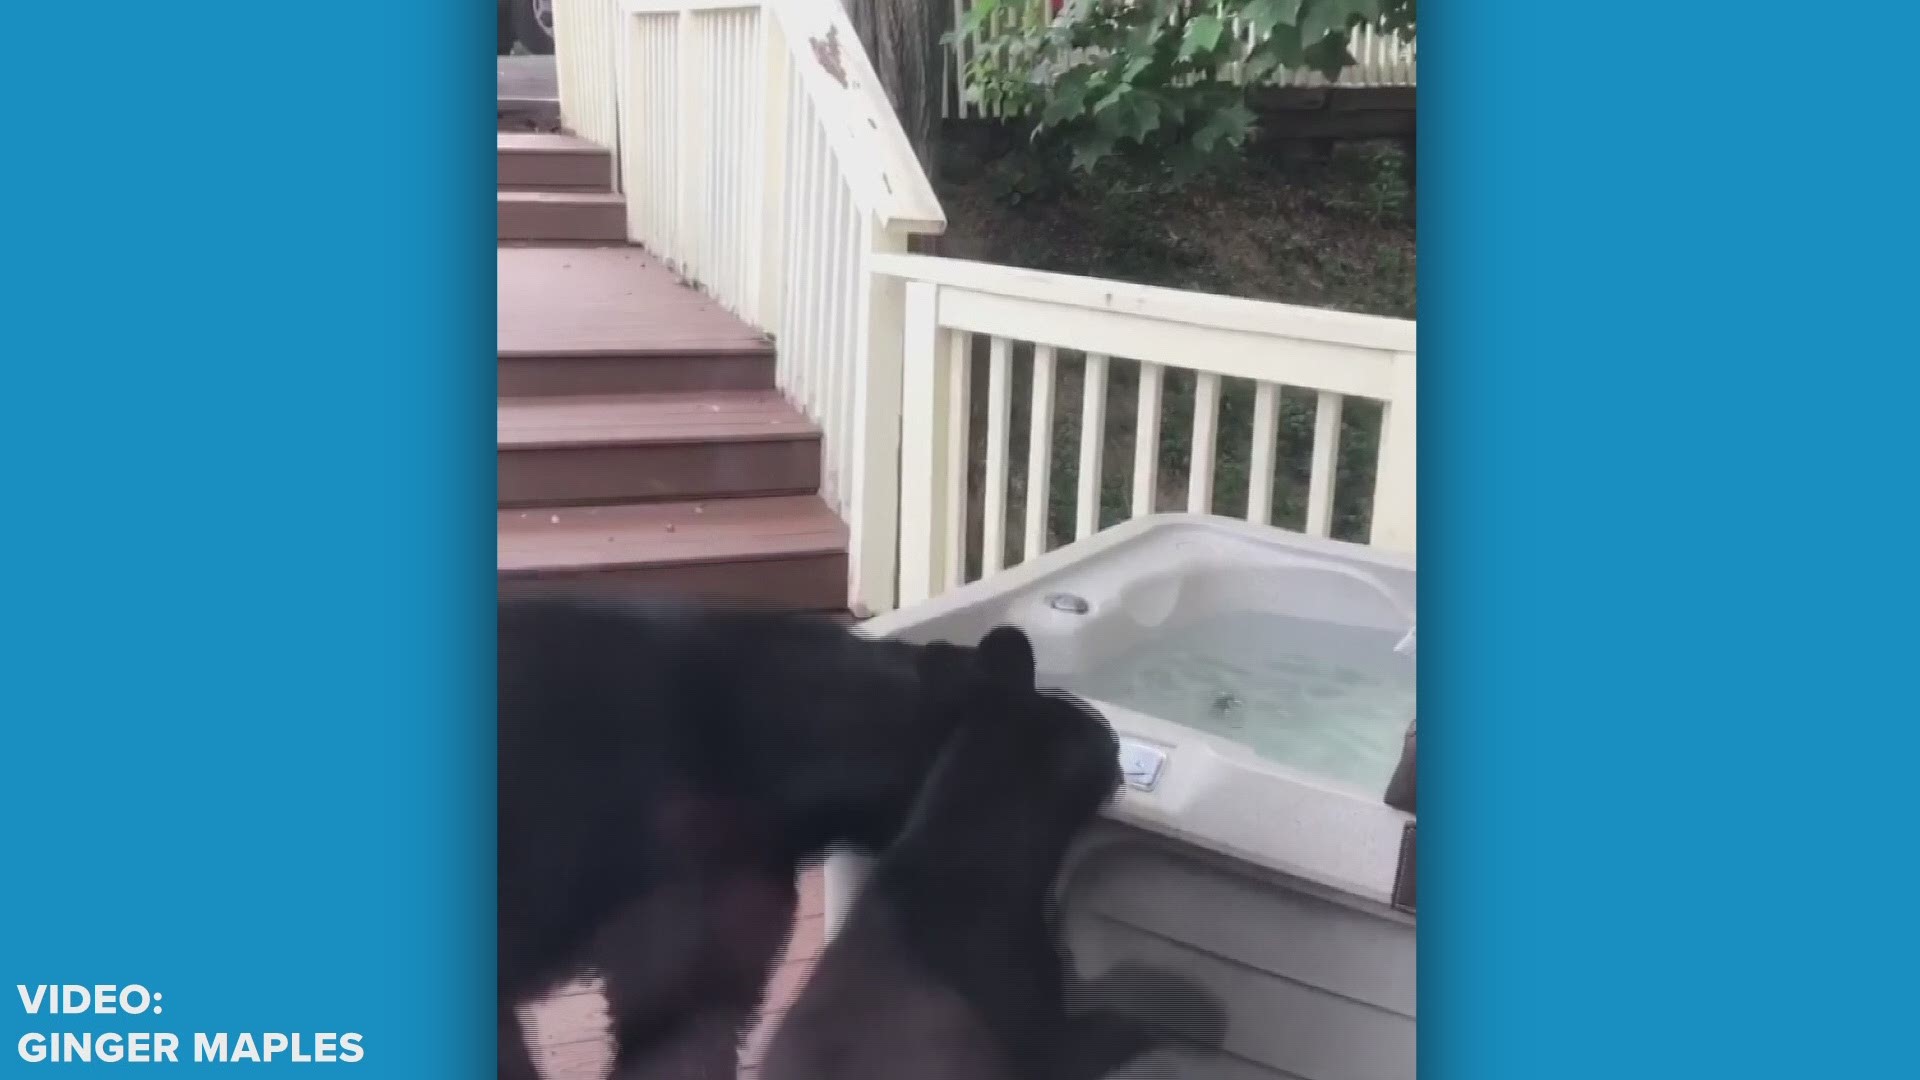 They were smarter than the average bear! A few bears decided to raid someone's hot tub in Gatlinburg to cool off on a particularly hot day.